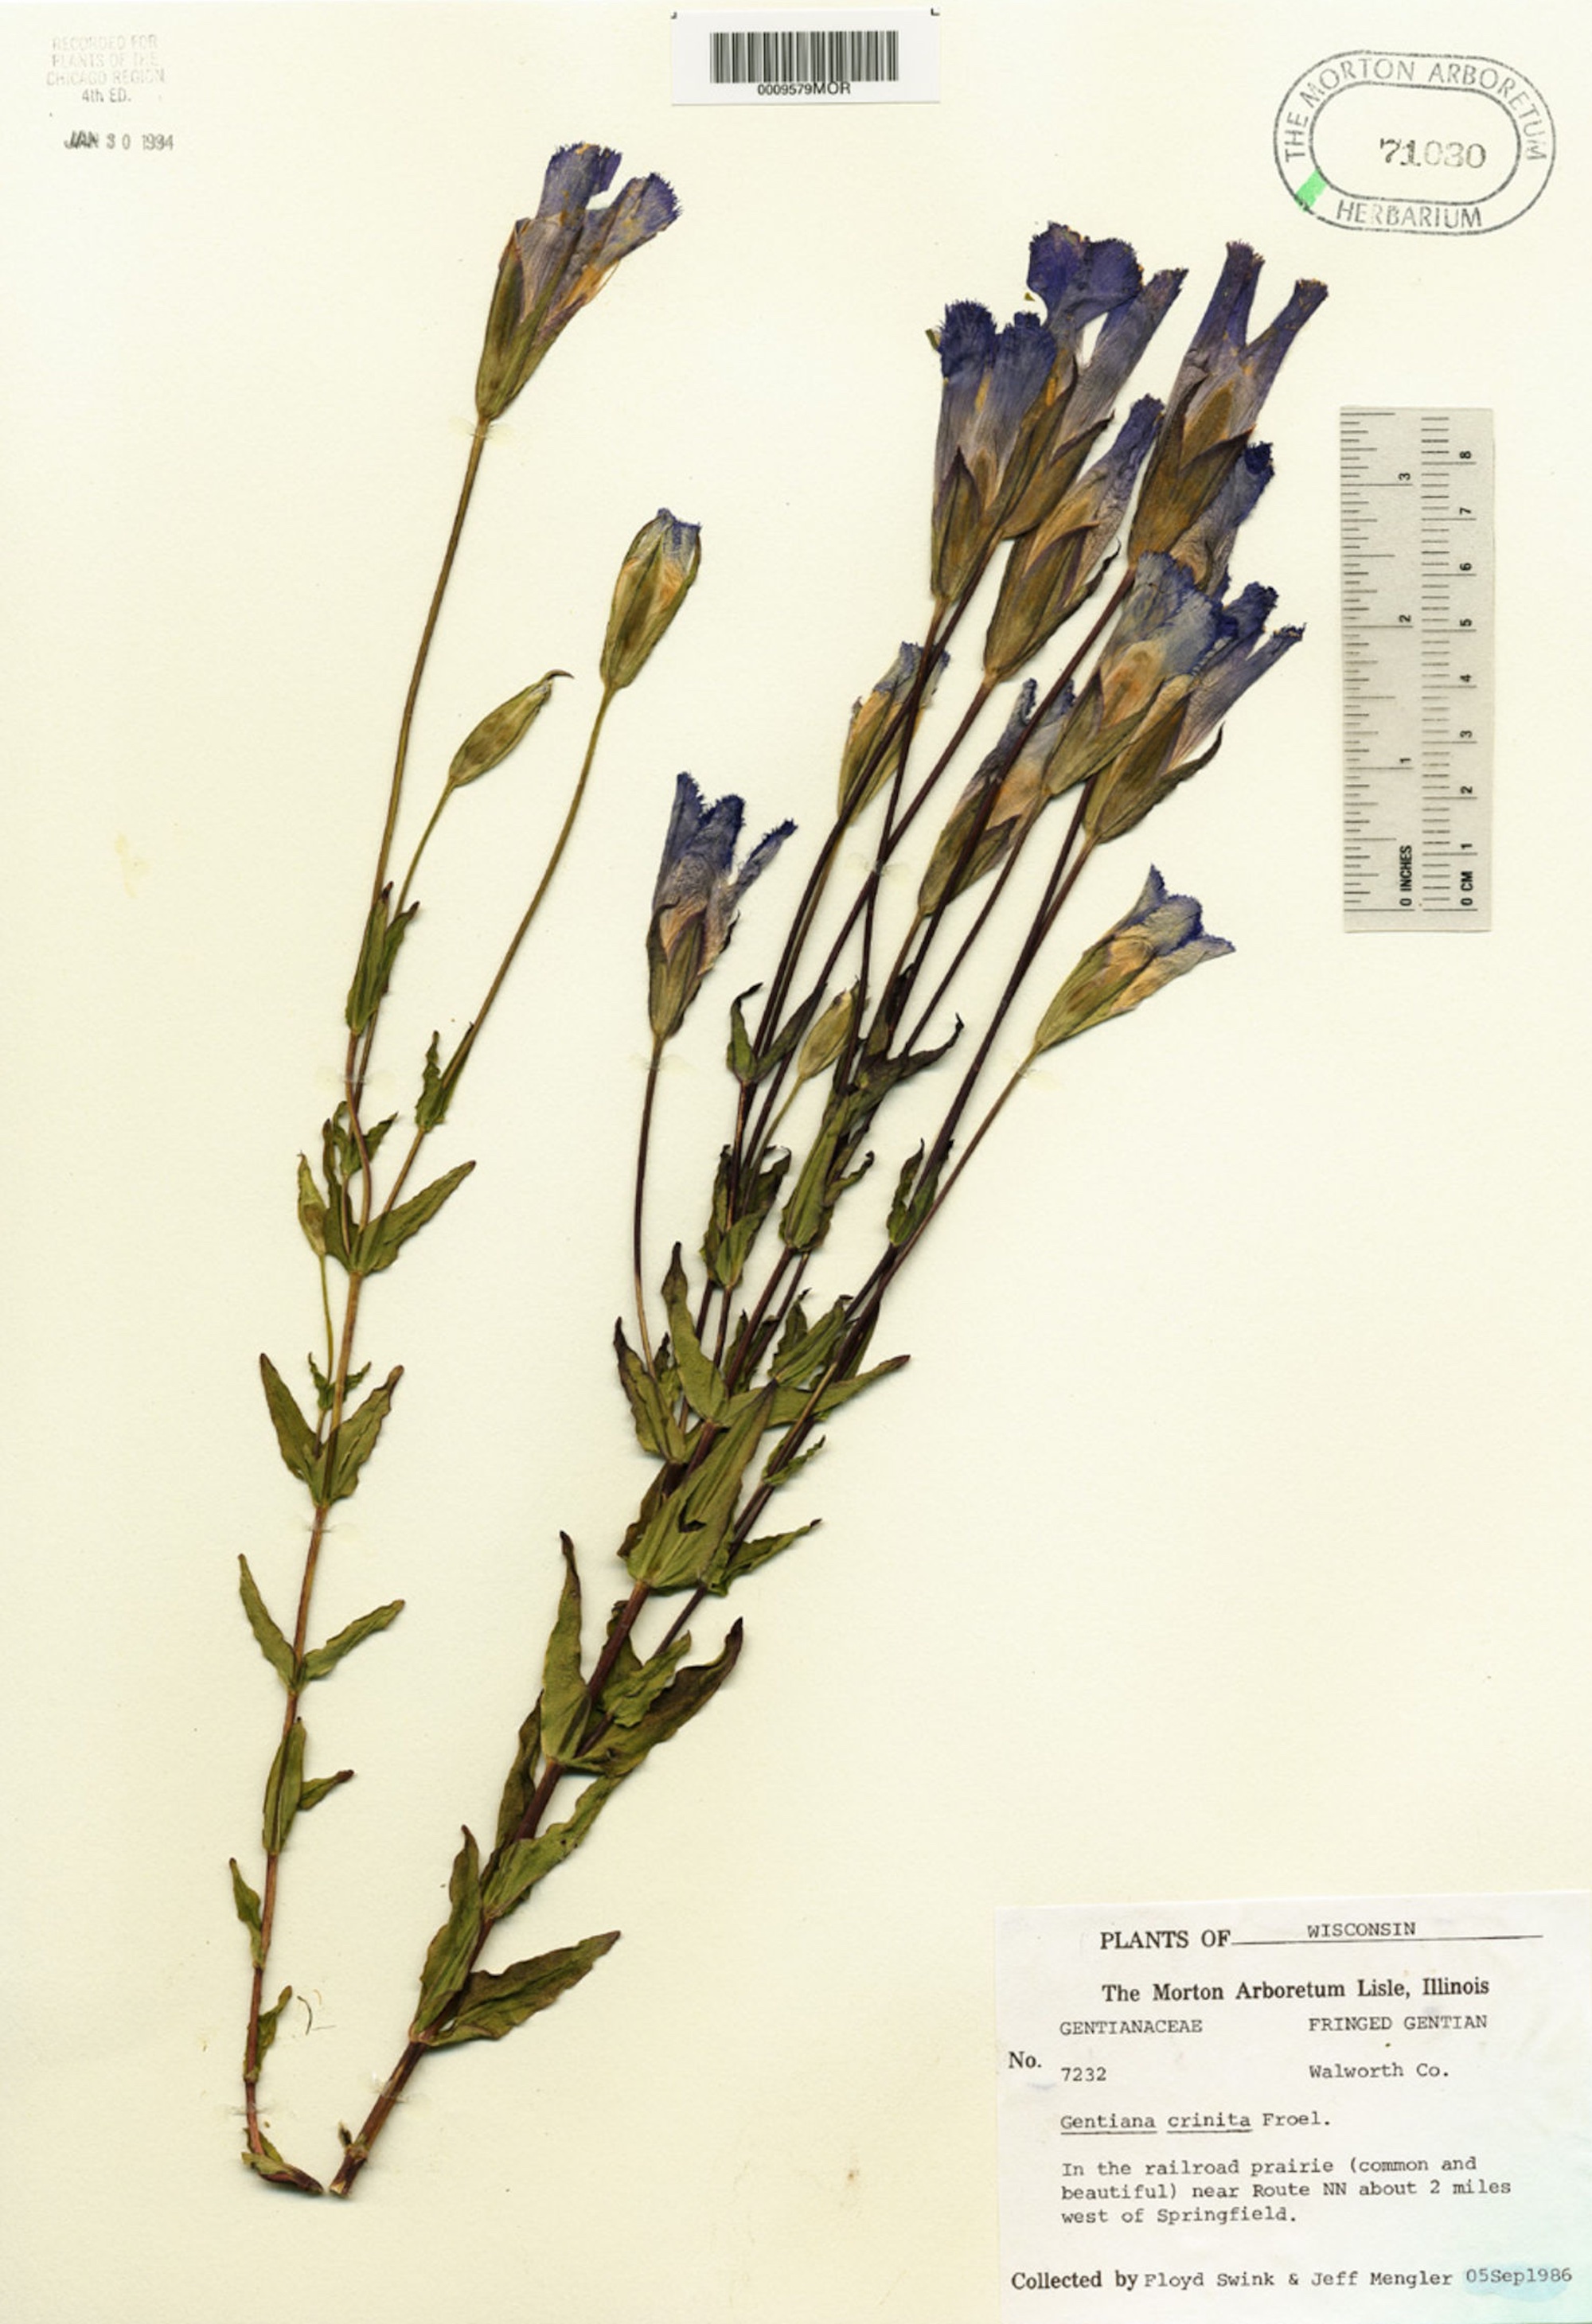 Fringed Gentian specimen collected 2 mile west of Springfield in Walworth County on September 5, 1986.